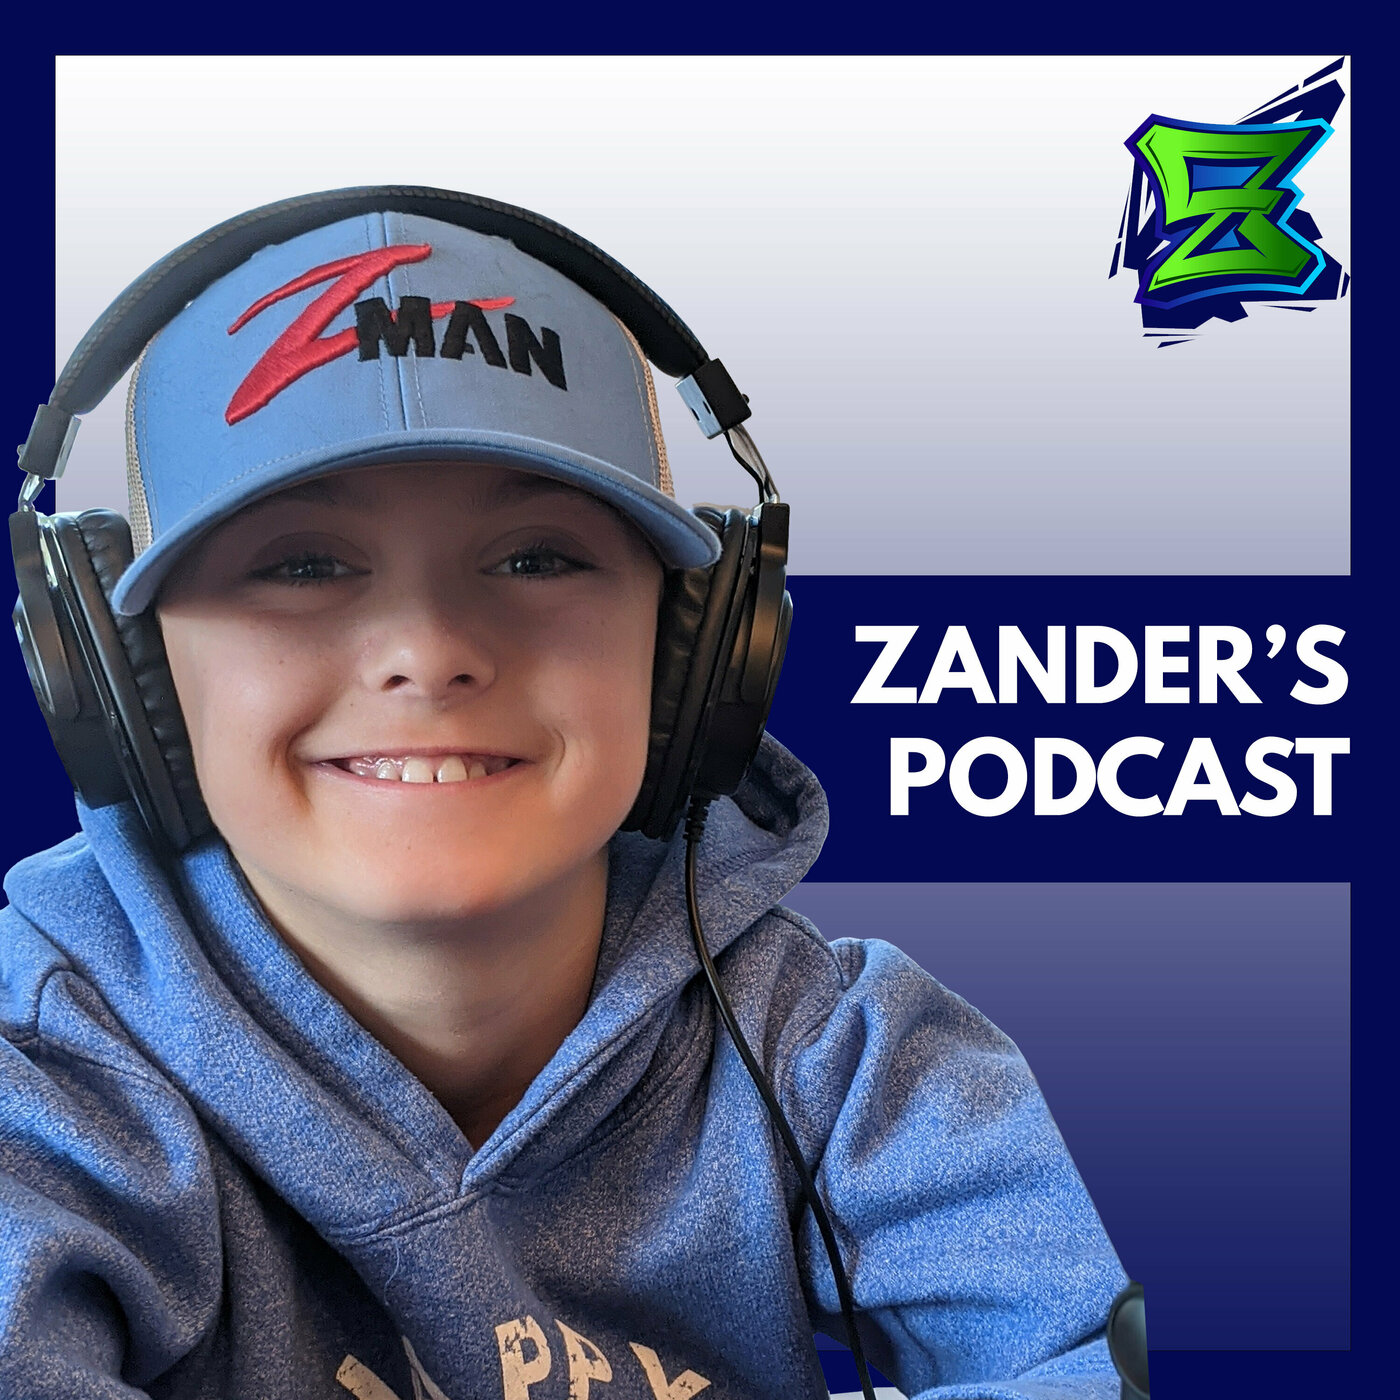 Zander's Cross-Country Tour Series with Gord Miller and Ray Ferraro